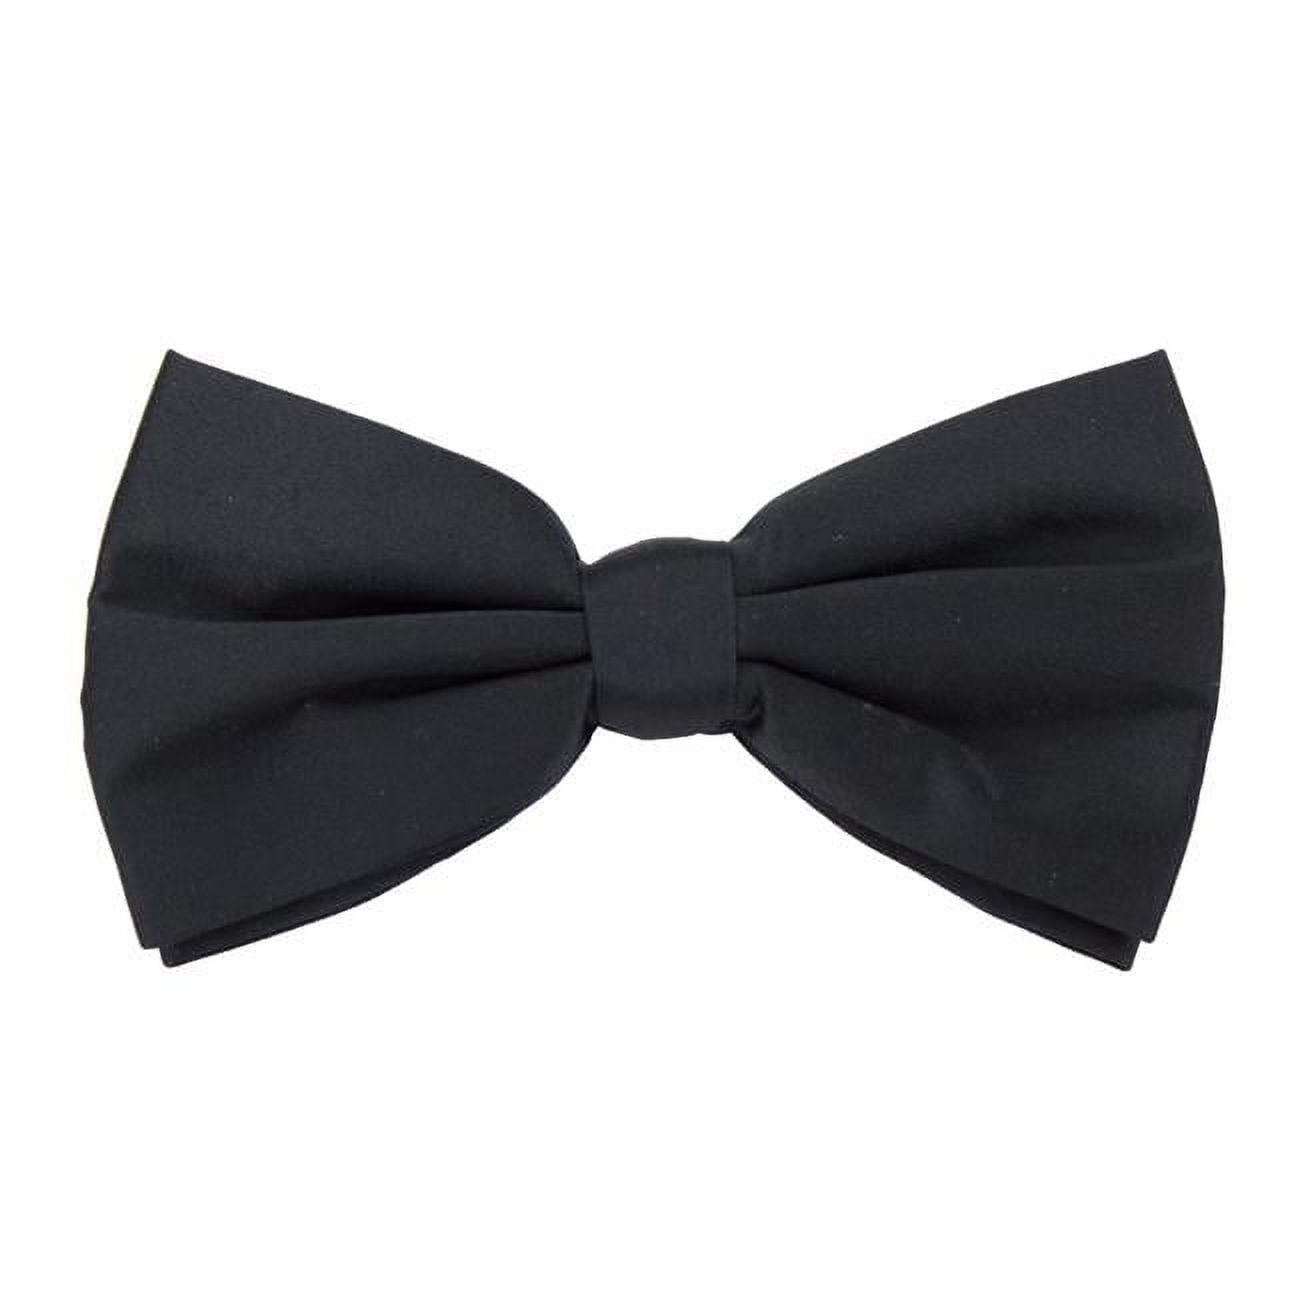 Picture of Brybelly Holdings GDEA-002 Formal Casino & Poker Dealer Clip on Bow Tie, Black